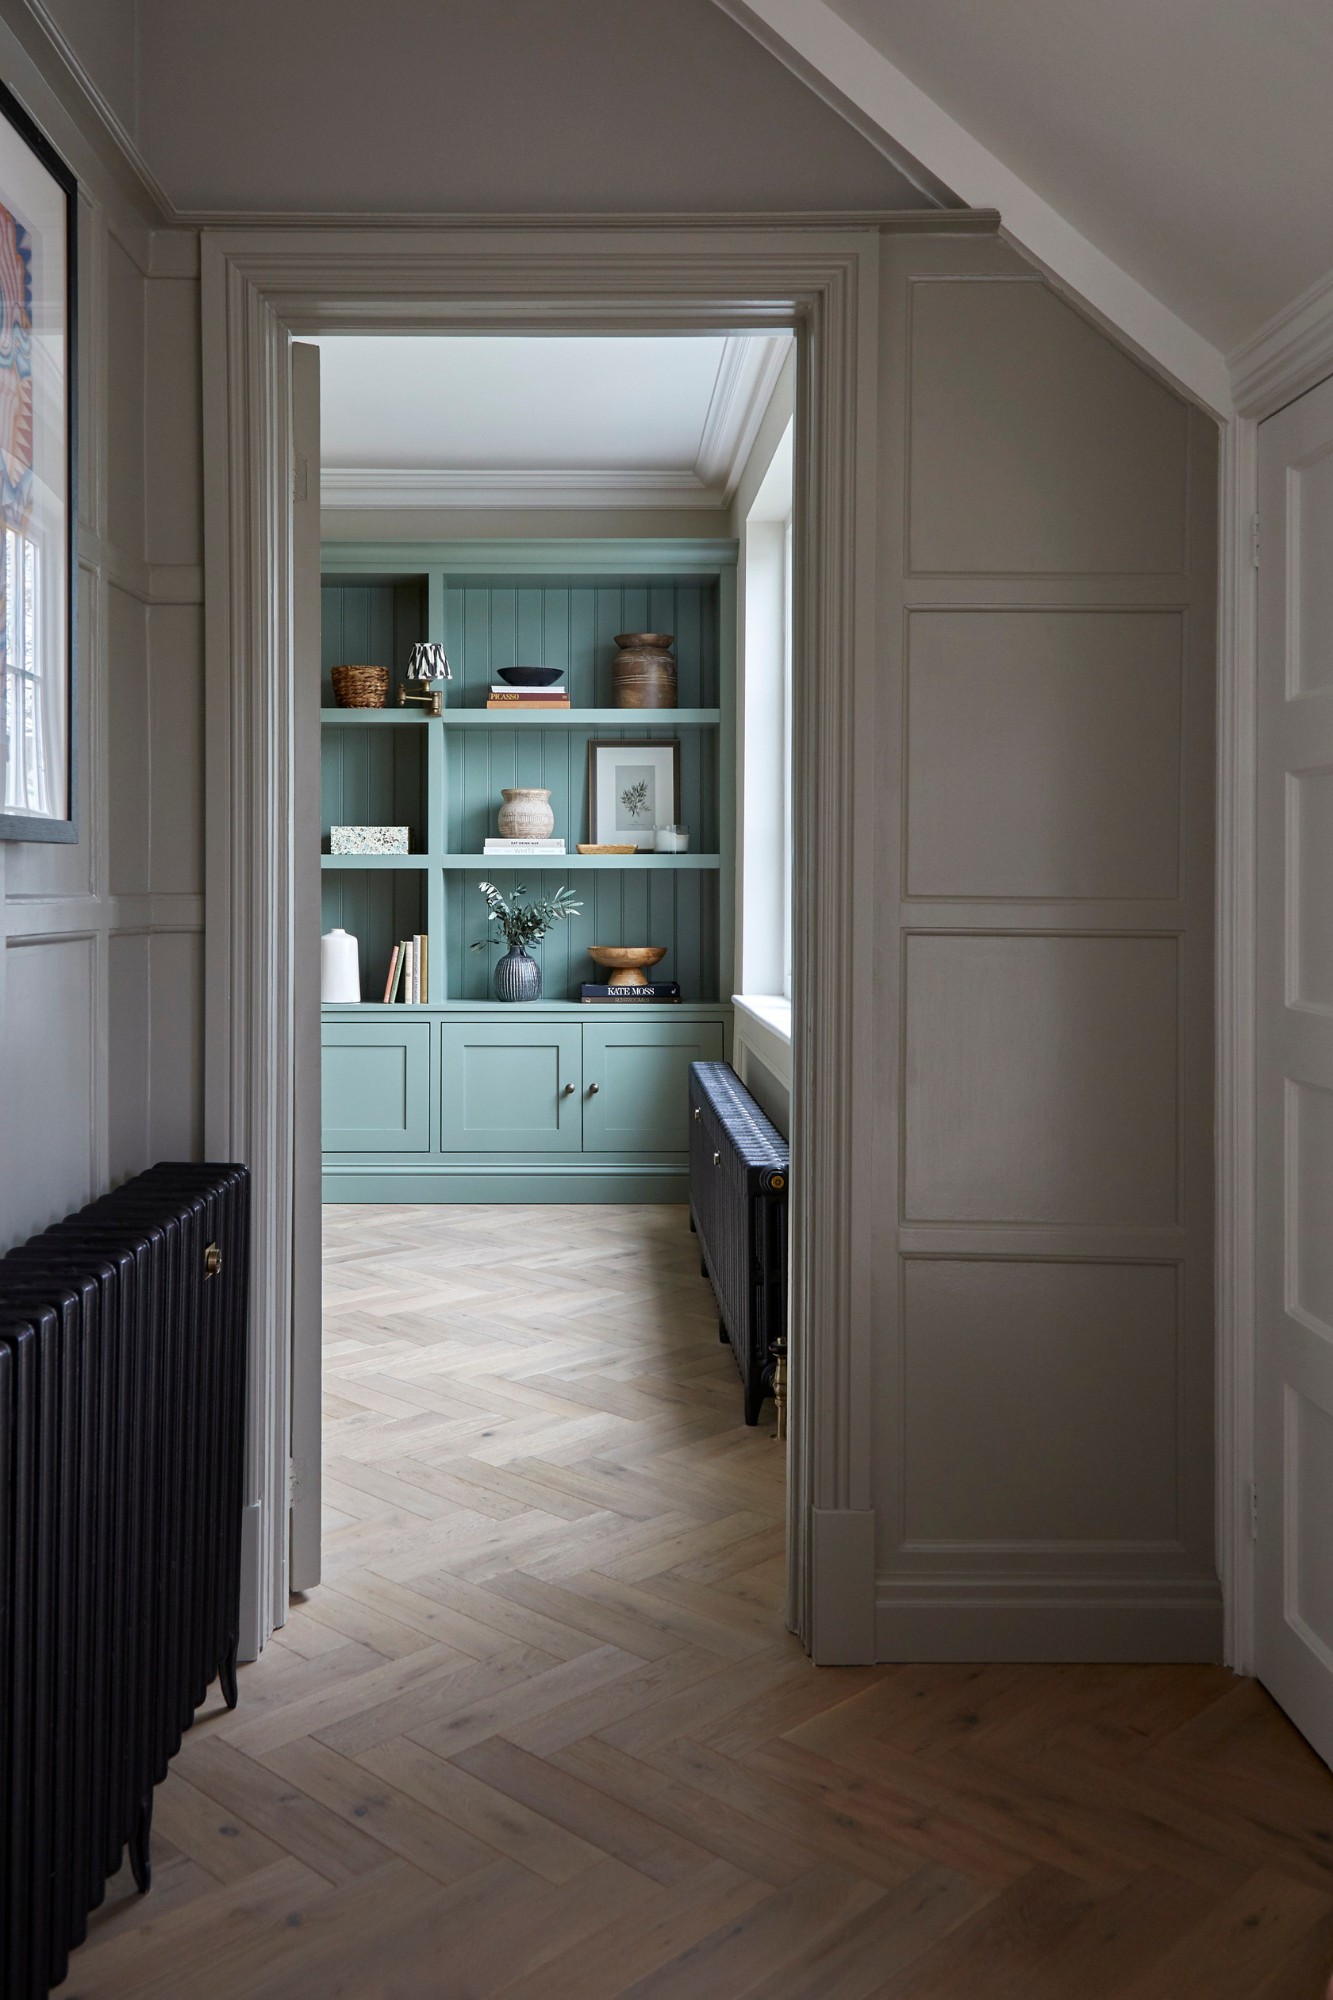 claire totman, The Story Behind Claire Totman Designs: Specialising in Period Properties